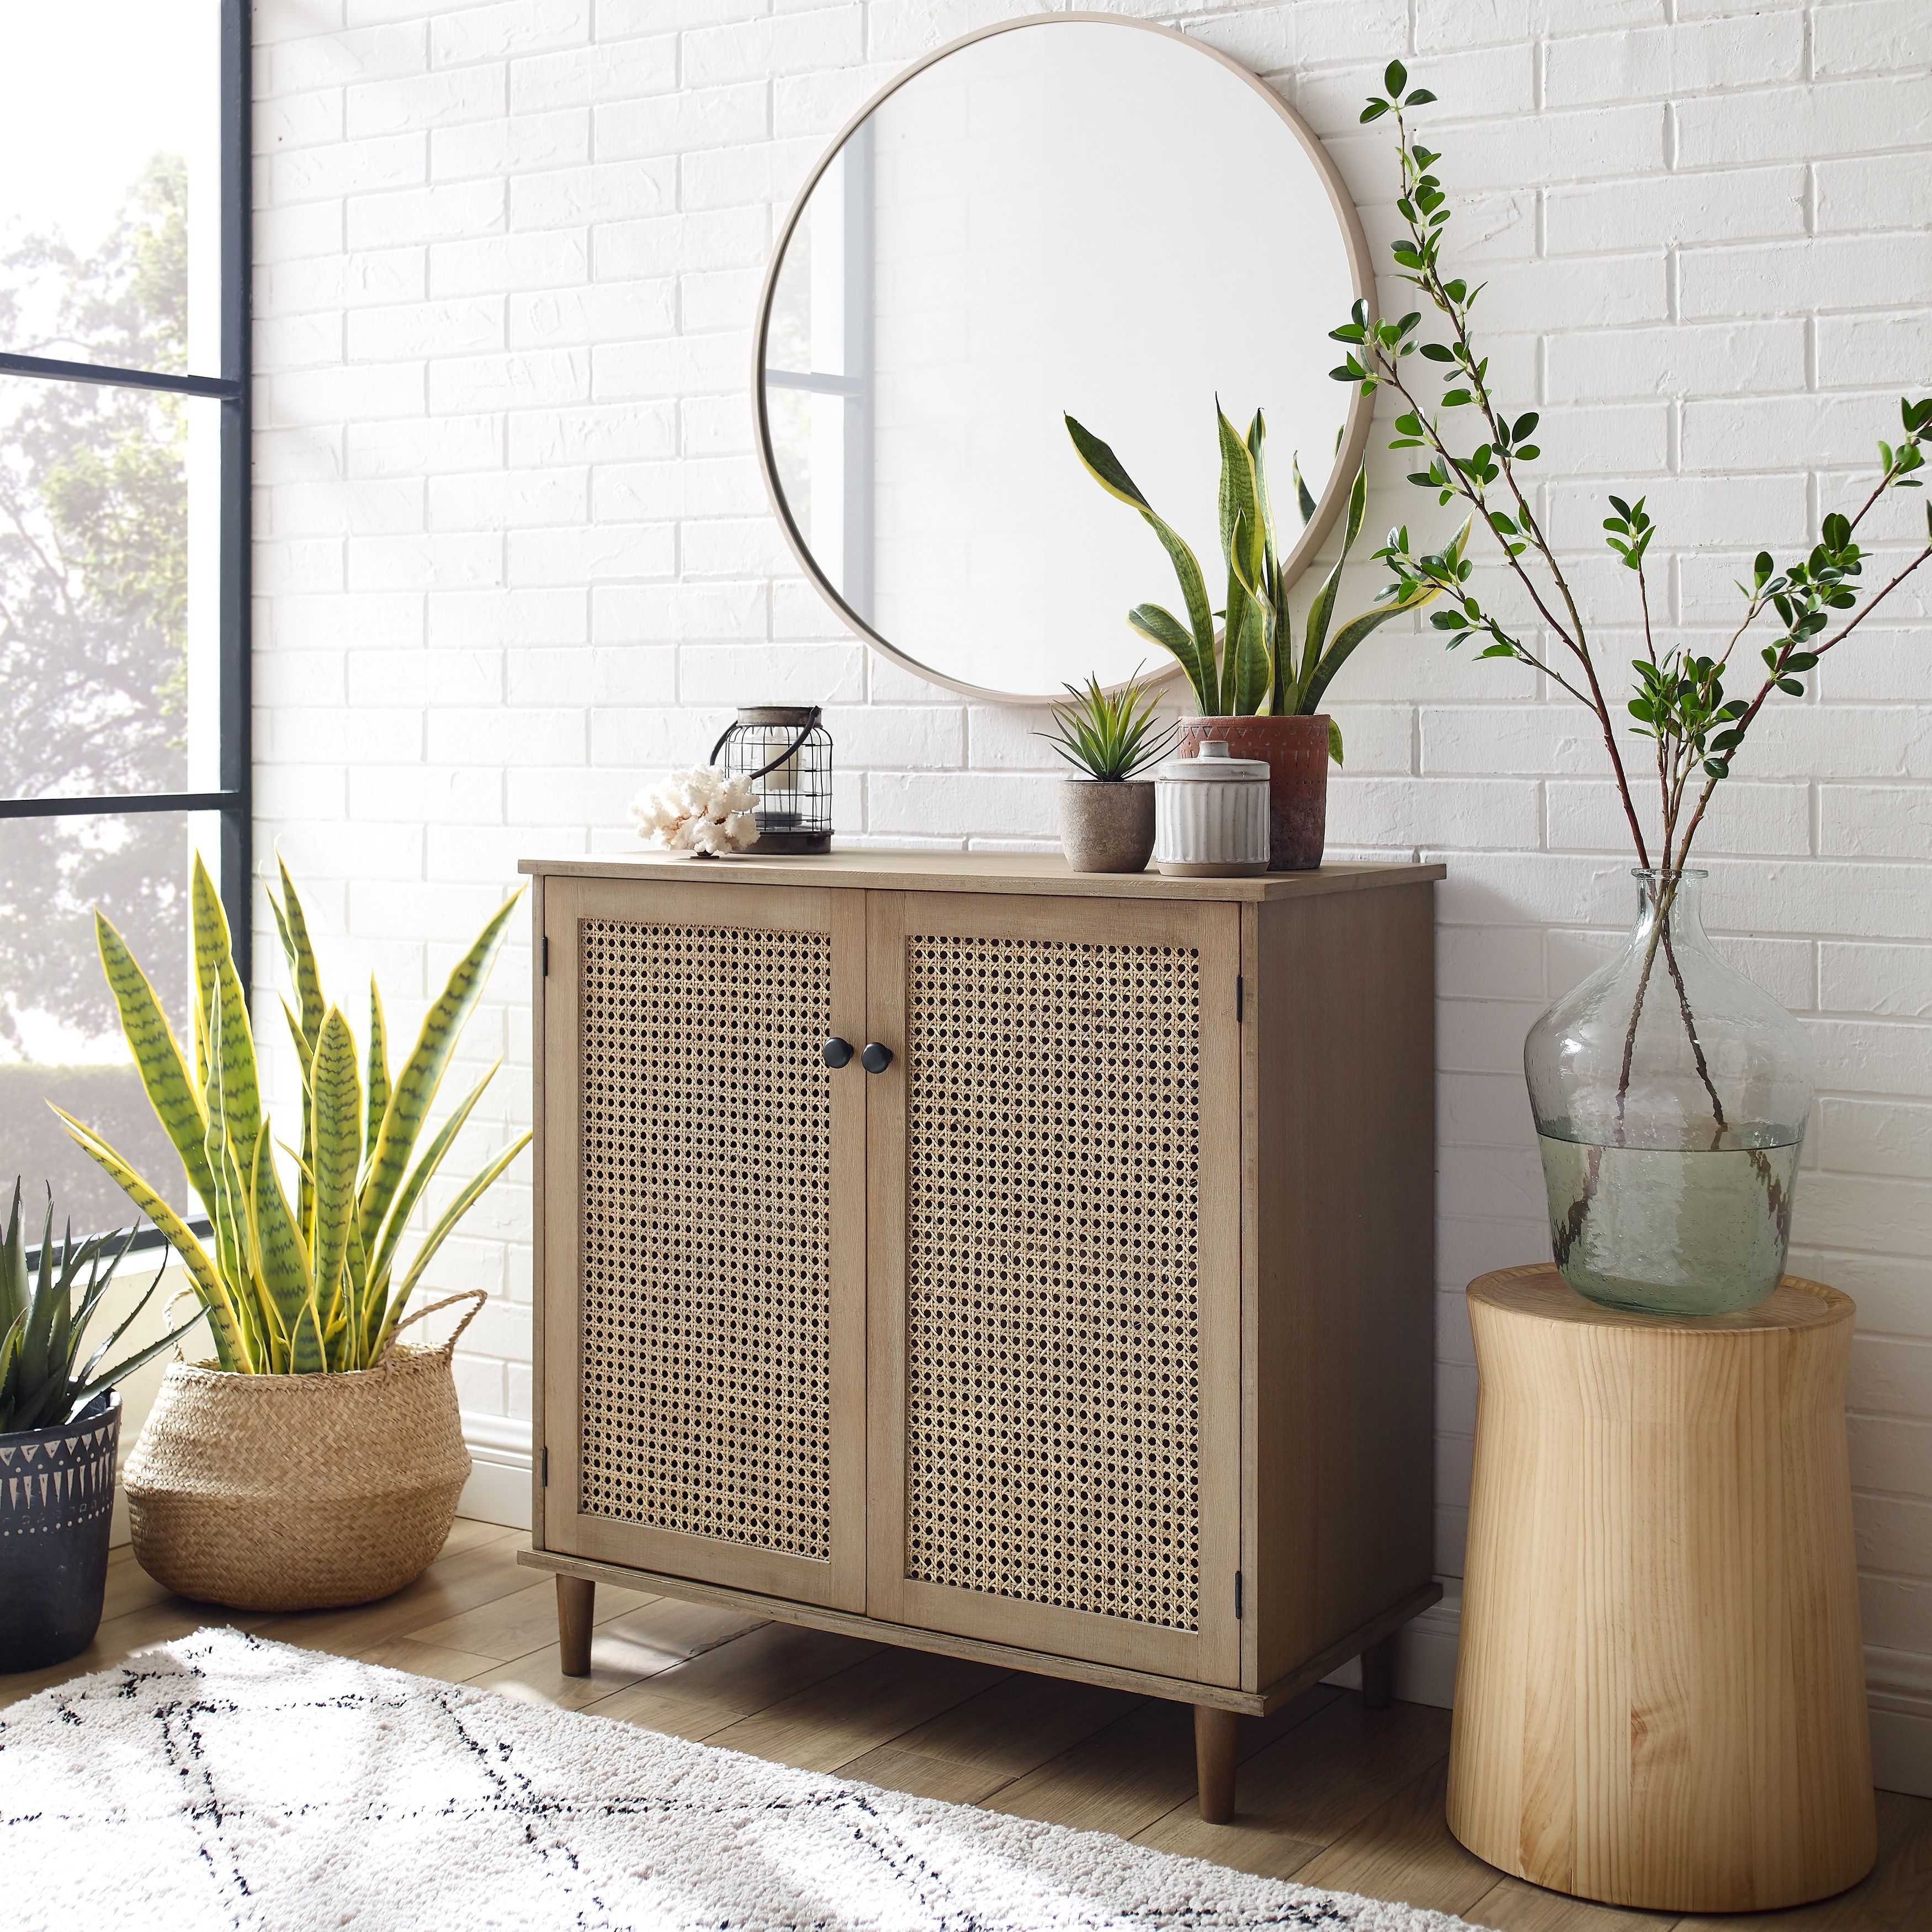 Art Leon Woven Rattan Wicker Doors Accent Cabinet Sideboard – Bed Bath &  Beyond – 31979554 In Sideboards Accent Cabinet (View 10 of 15)